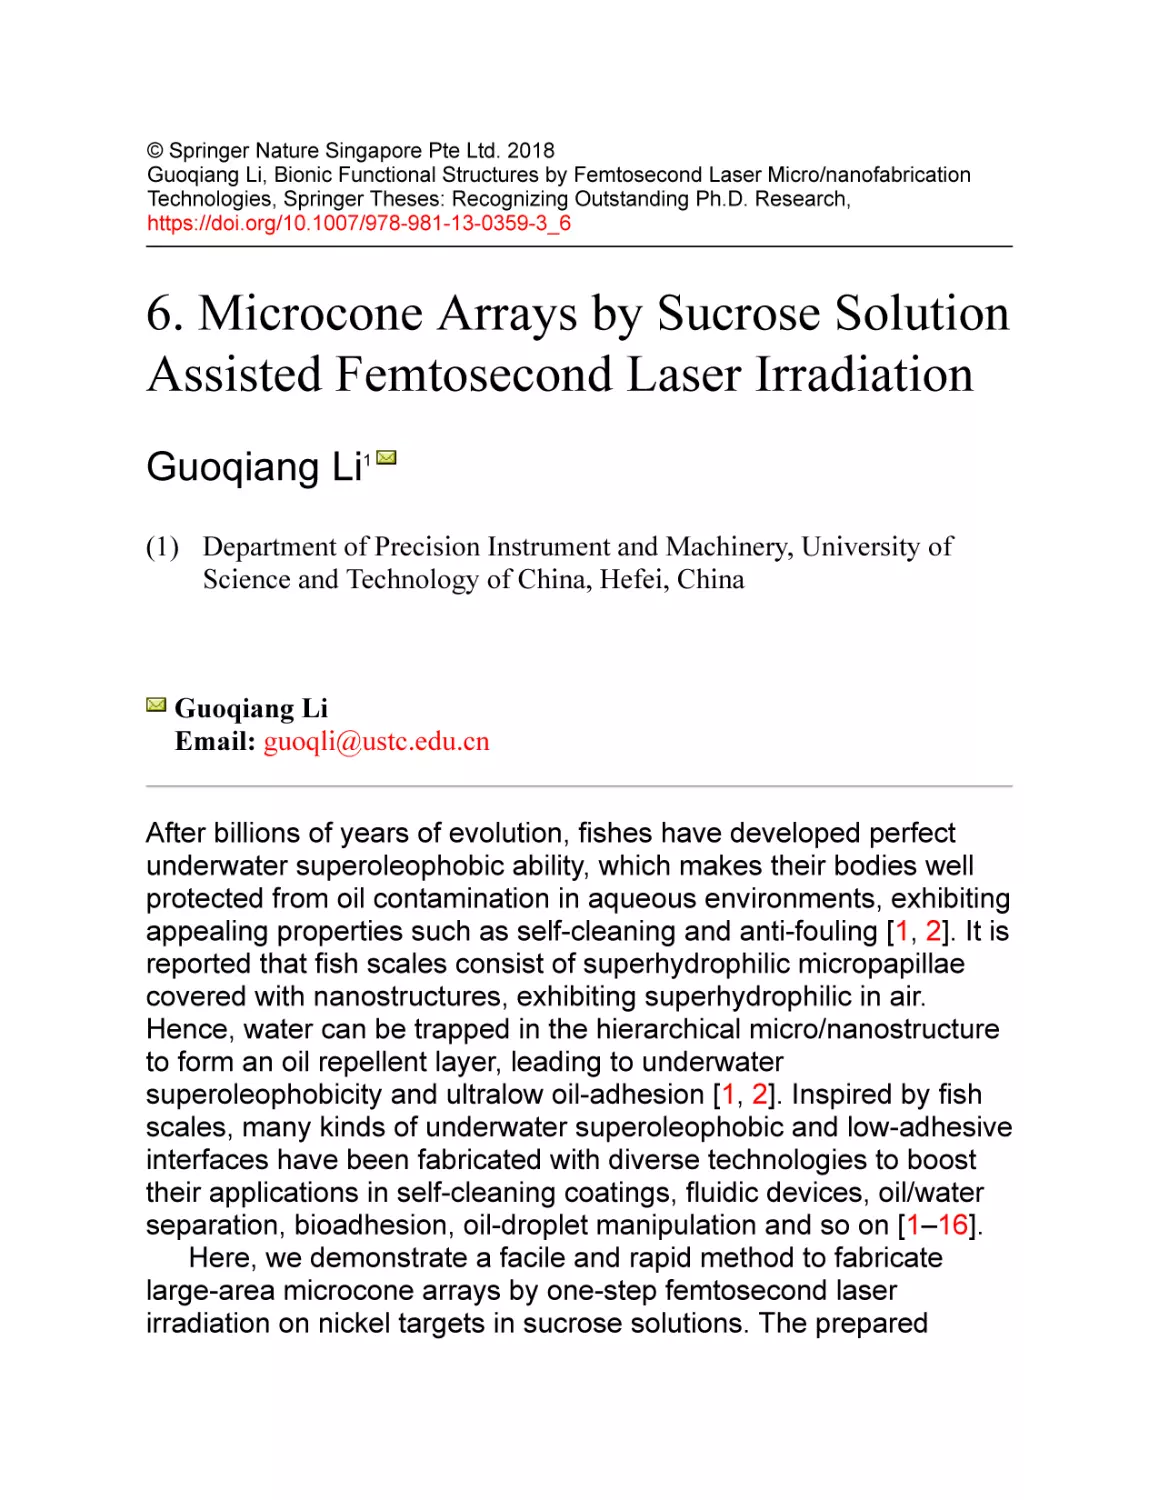 6. Microcone Arrays by Sucrose Solution Assisted Femtosecond Laser Irradiation